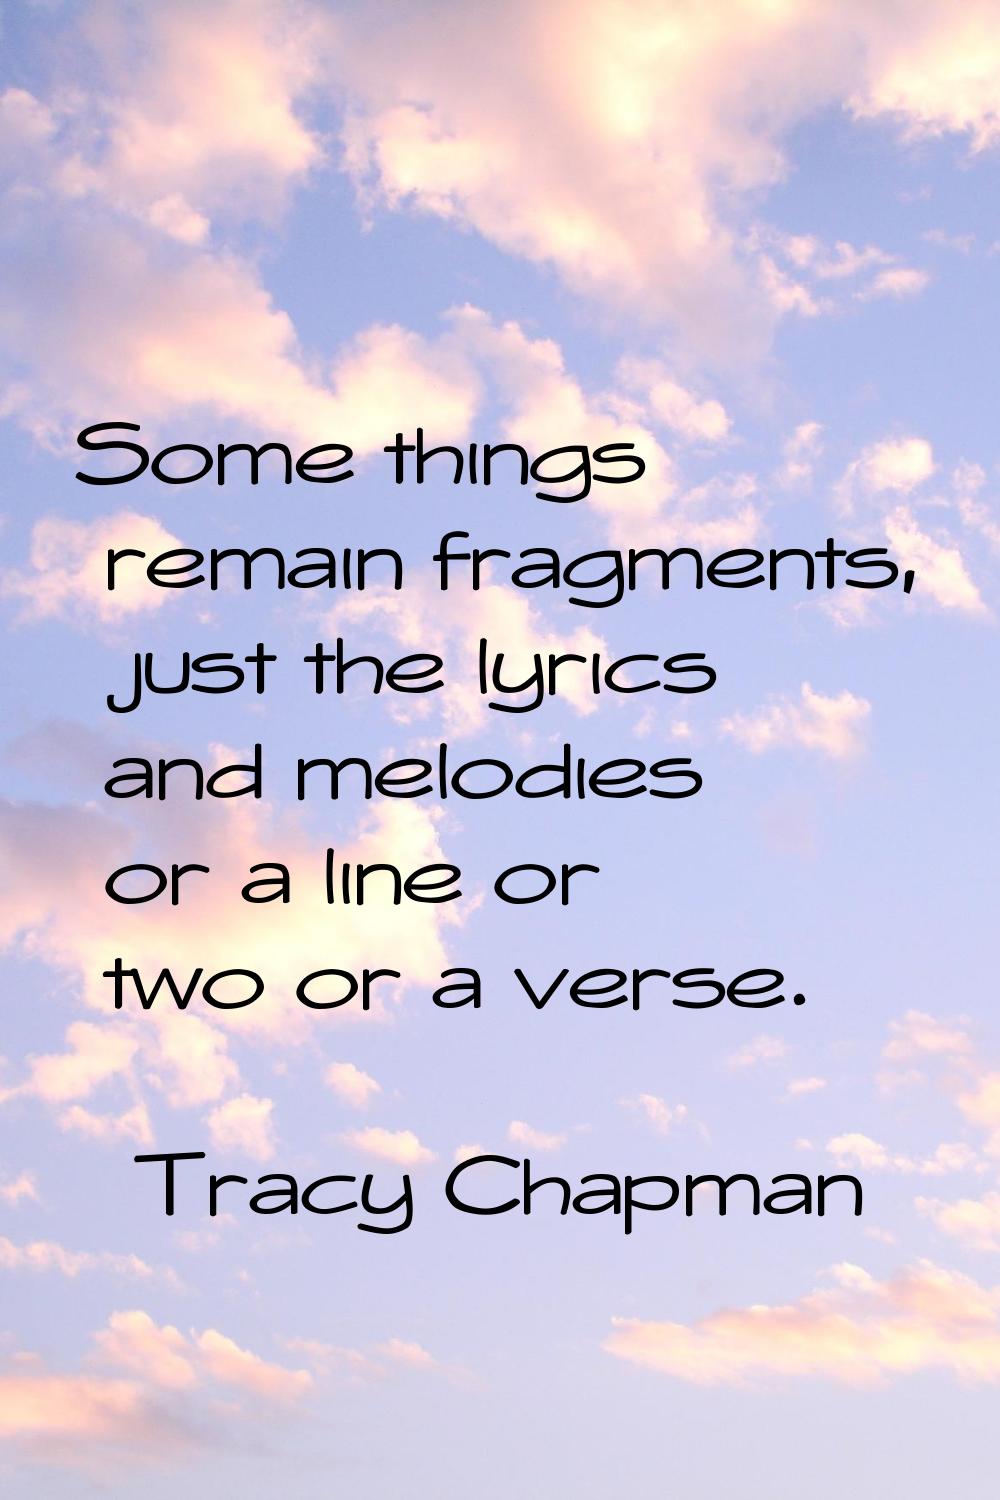 Some things remain fragments, just the lyrics and melodies or a line or two or a verse.